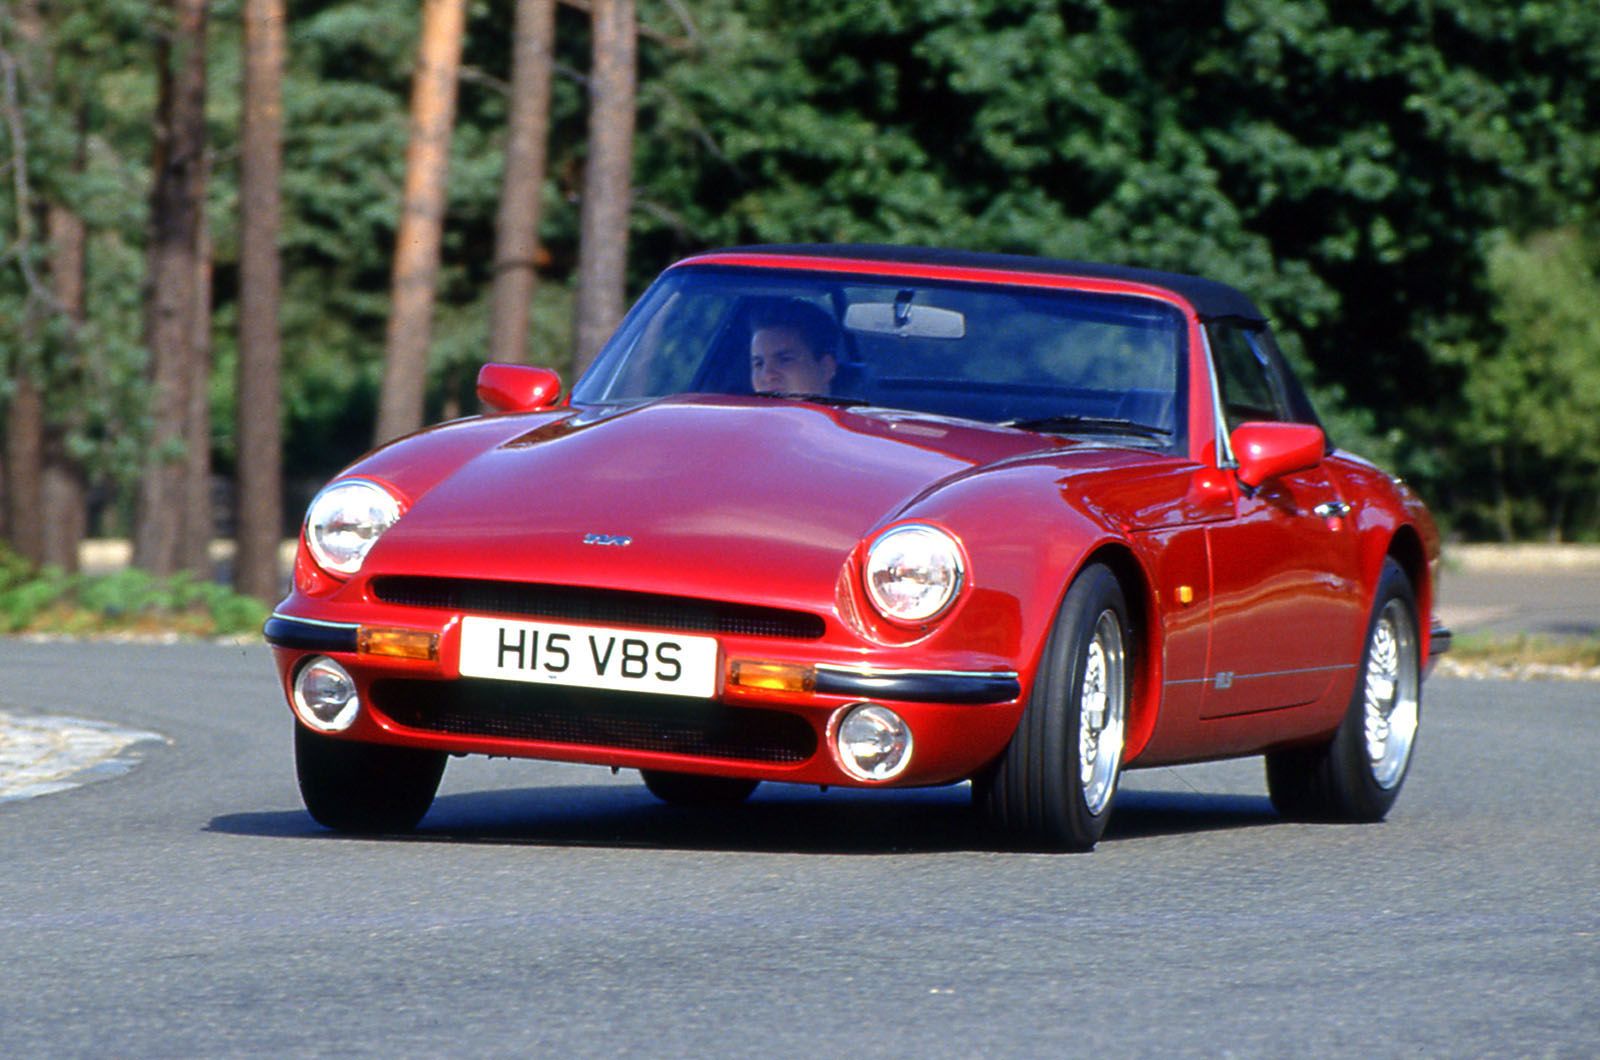 Red TVR S2